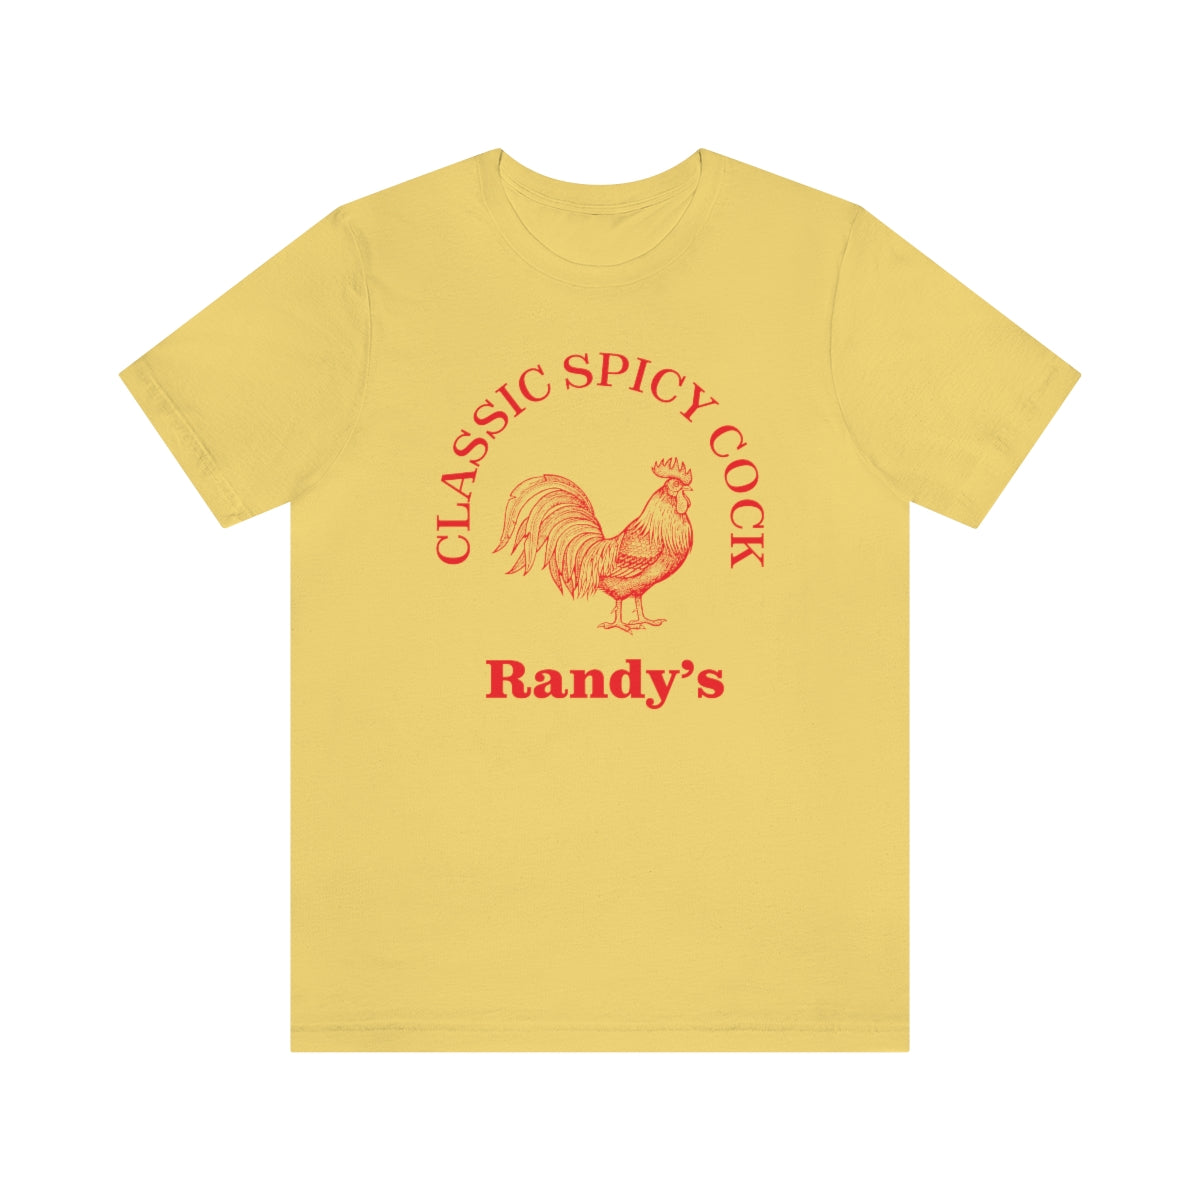 Randy's Classic Spicy Cock T-Shirt